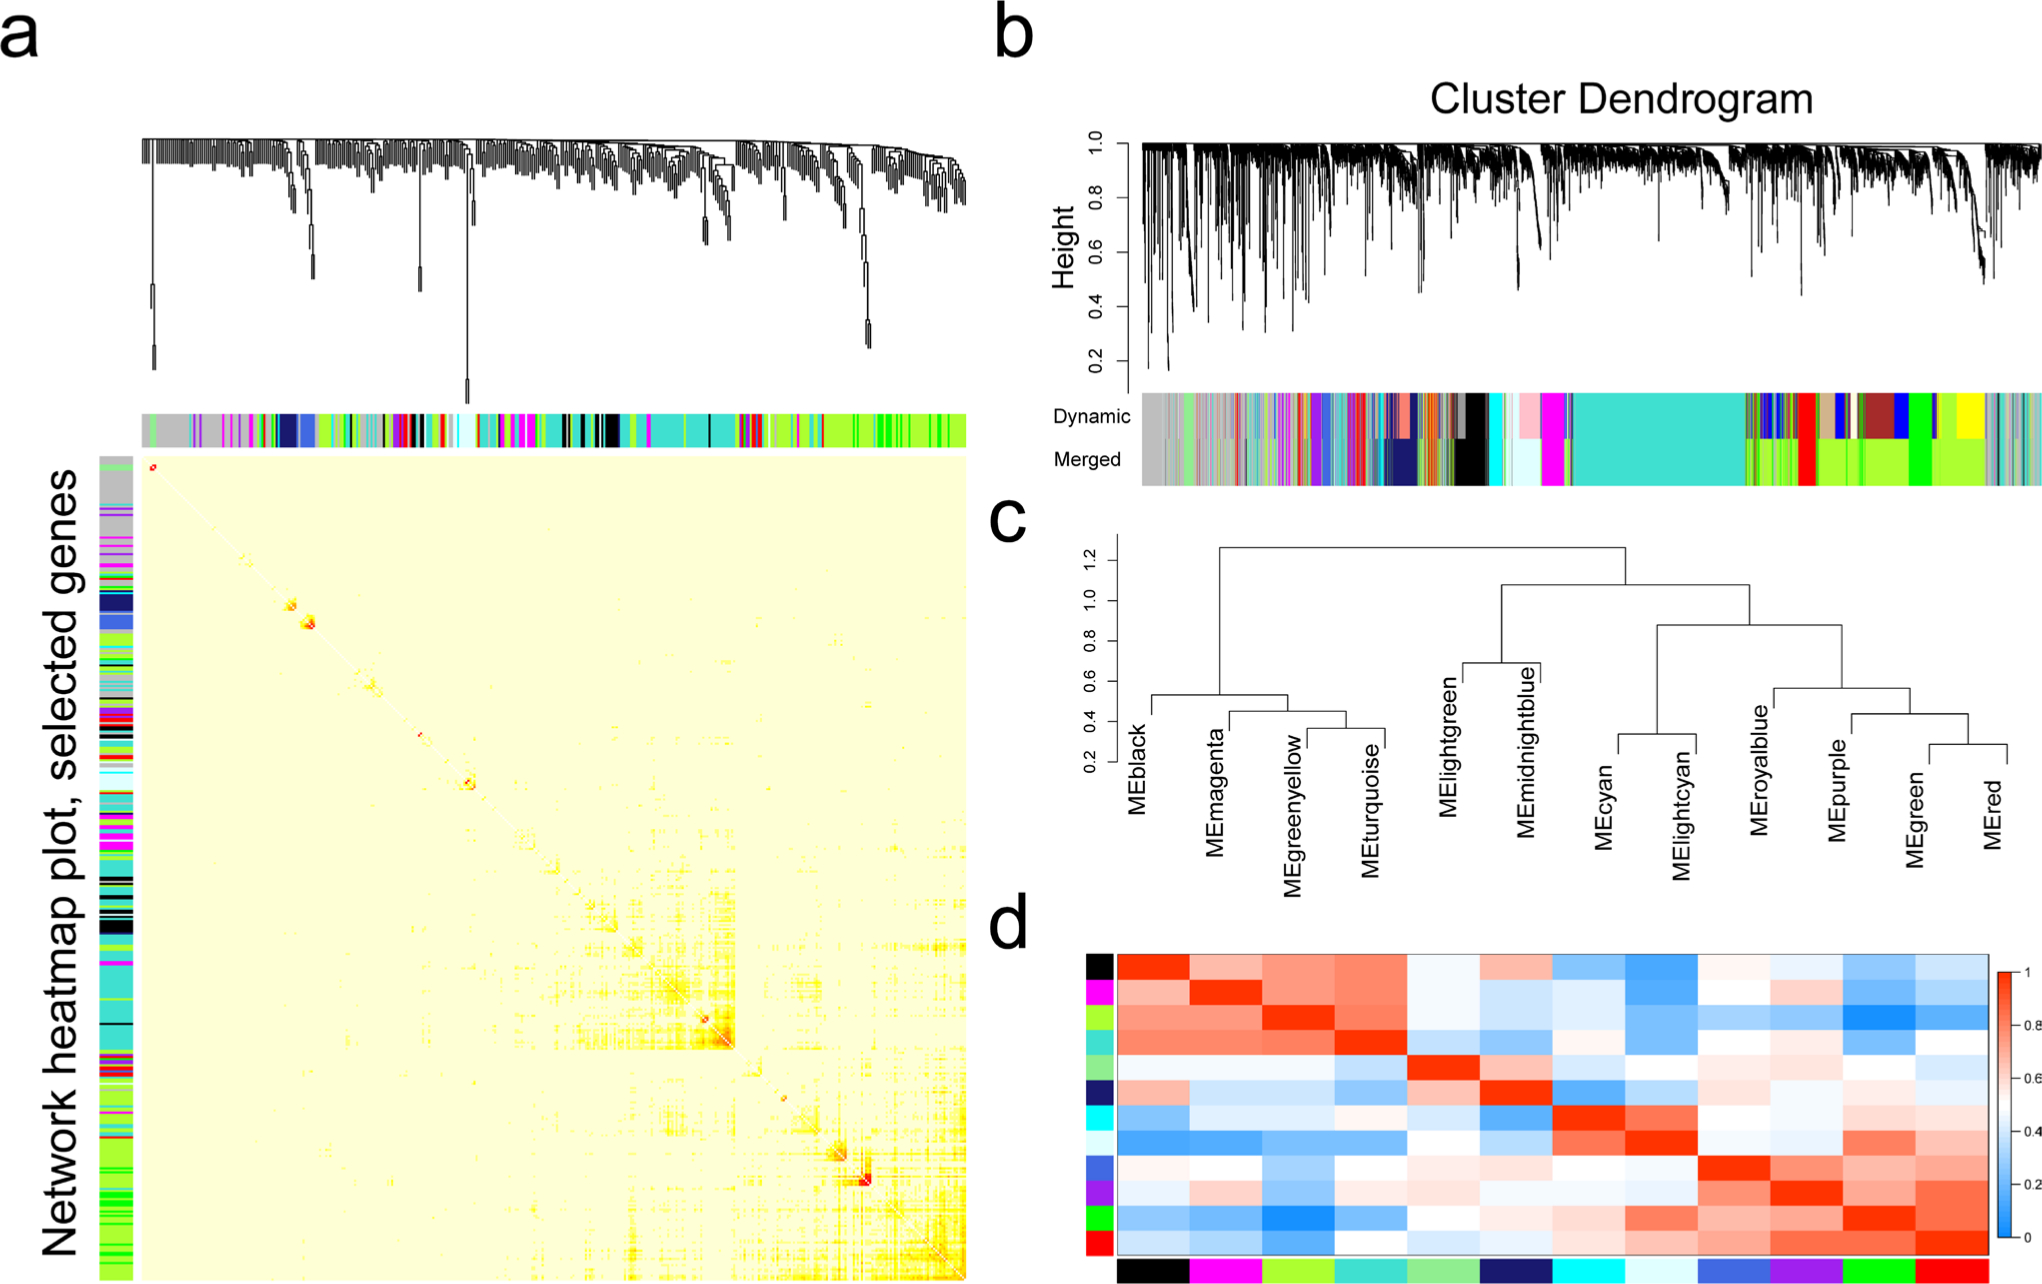 Fig. 2 
            Topological overlap calculation and module identification. a) Heatmap plot of topological overlap in the gene network. Red squares along the diagonal correspond to modules. b) Gene dendrogram calculated by average linkage hierarchical clustering. The colour row underneath the dendrogram shows the assigned original module and the merged module. c) Hierarchical clustering of module eigengenes that summarize the modules identified in the clustering analysis. d) Heatmap plot of the eigengene adjacencies. Each row and column in the heatmap corresponds to one module eigengene.
          